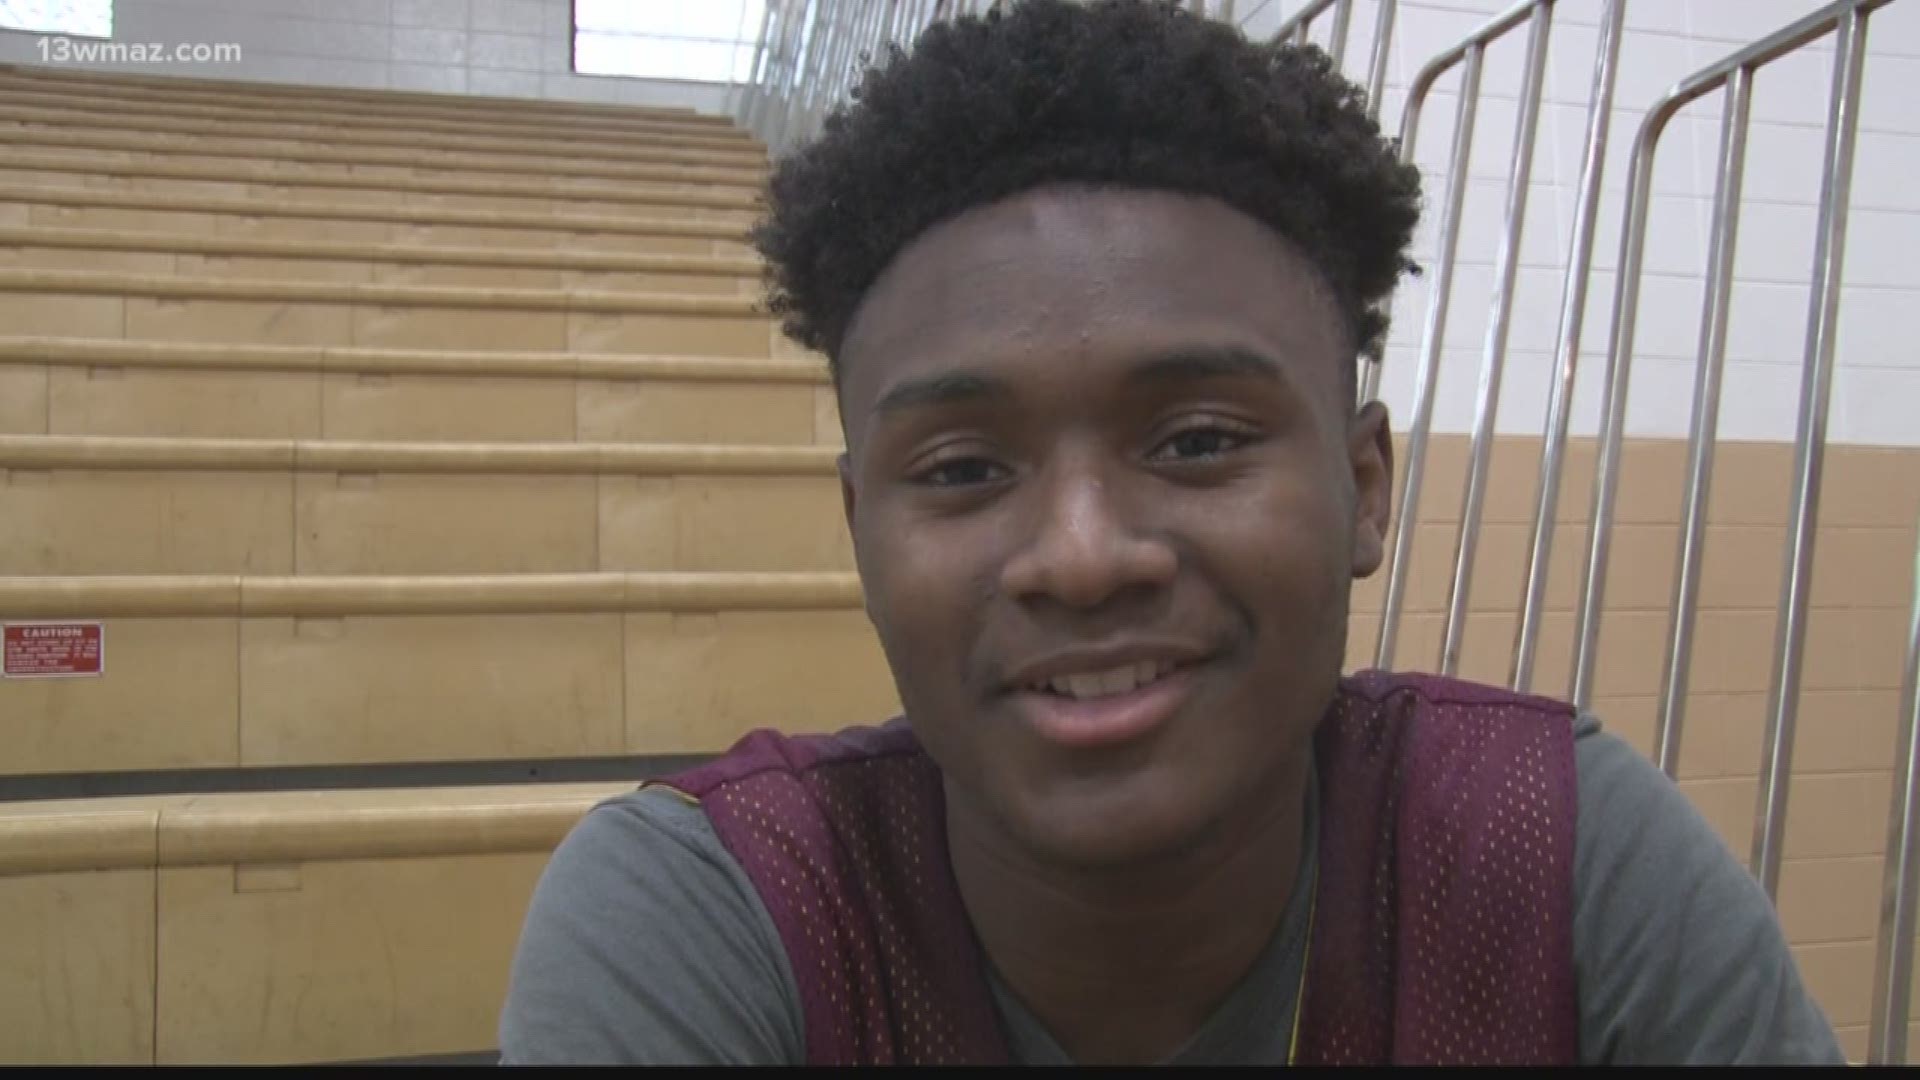 Our Athlete of the Week is one of Central Georgia's newest top dogs, Hancock Central's Jamal Taylor.